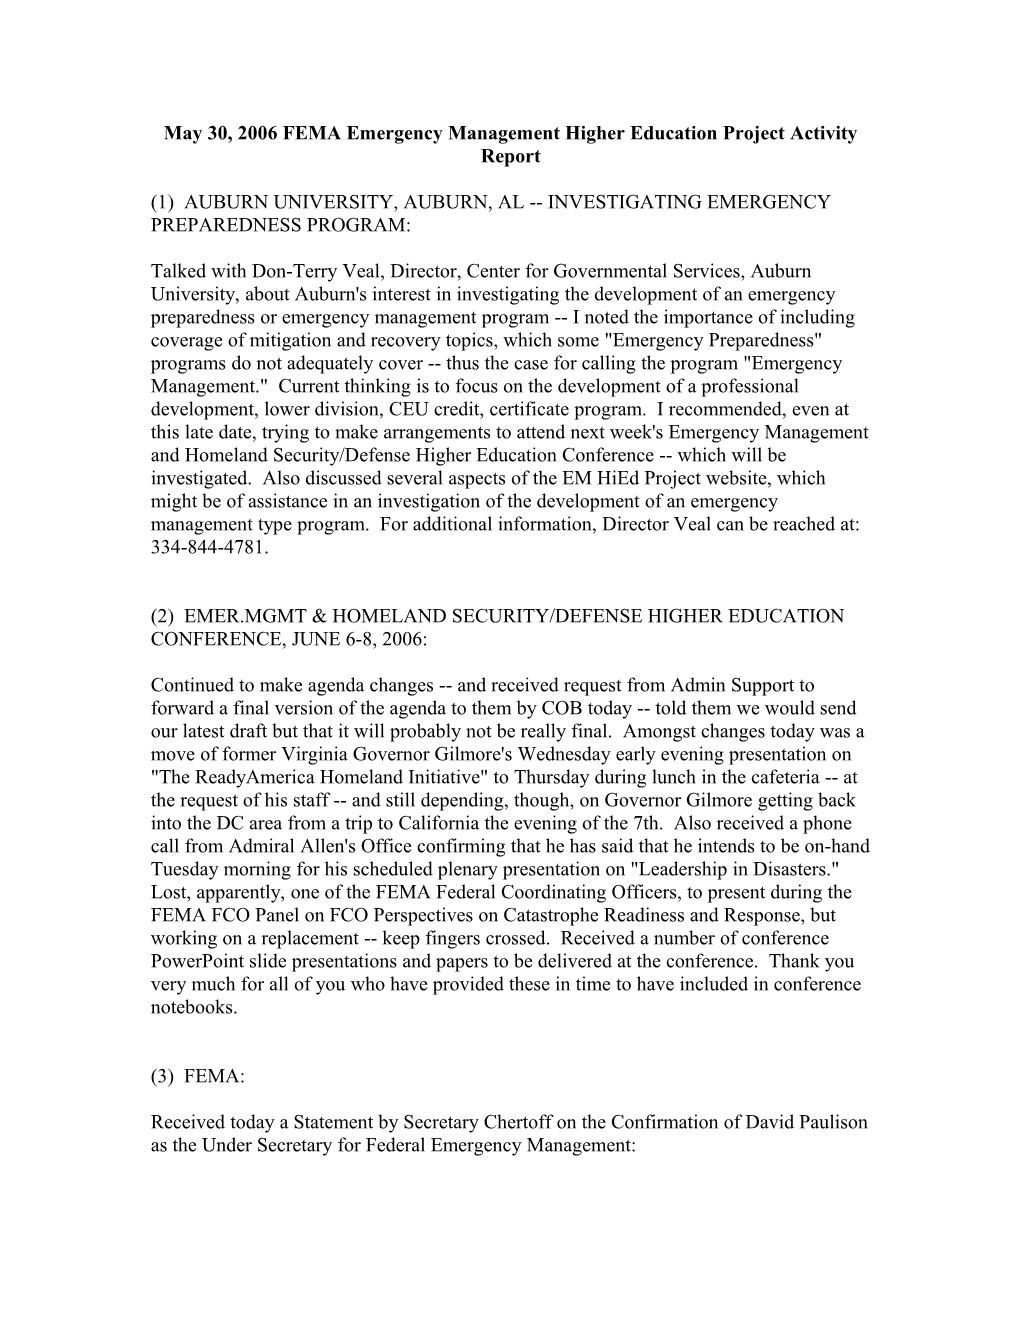 May 30, 2006 FEMA Emergency Management Higher Education Project Activity Report